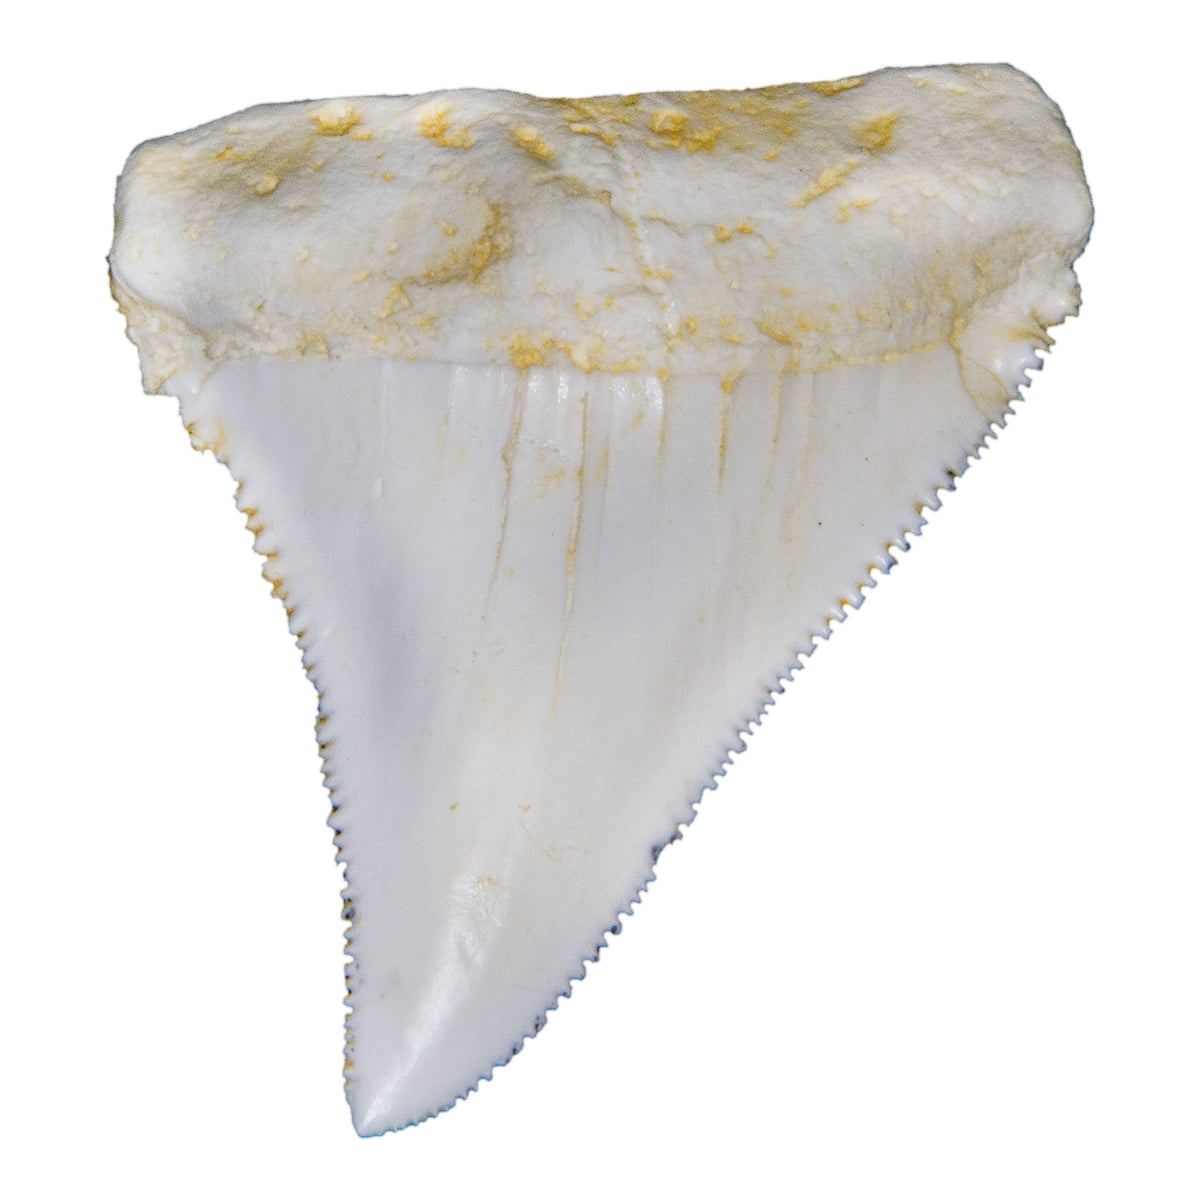 Replica Great White Shark Tooth For Sale — Skulls Unlimited International,  Inc.